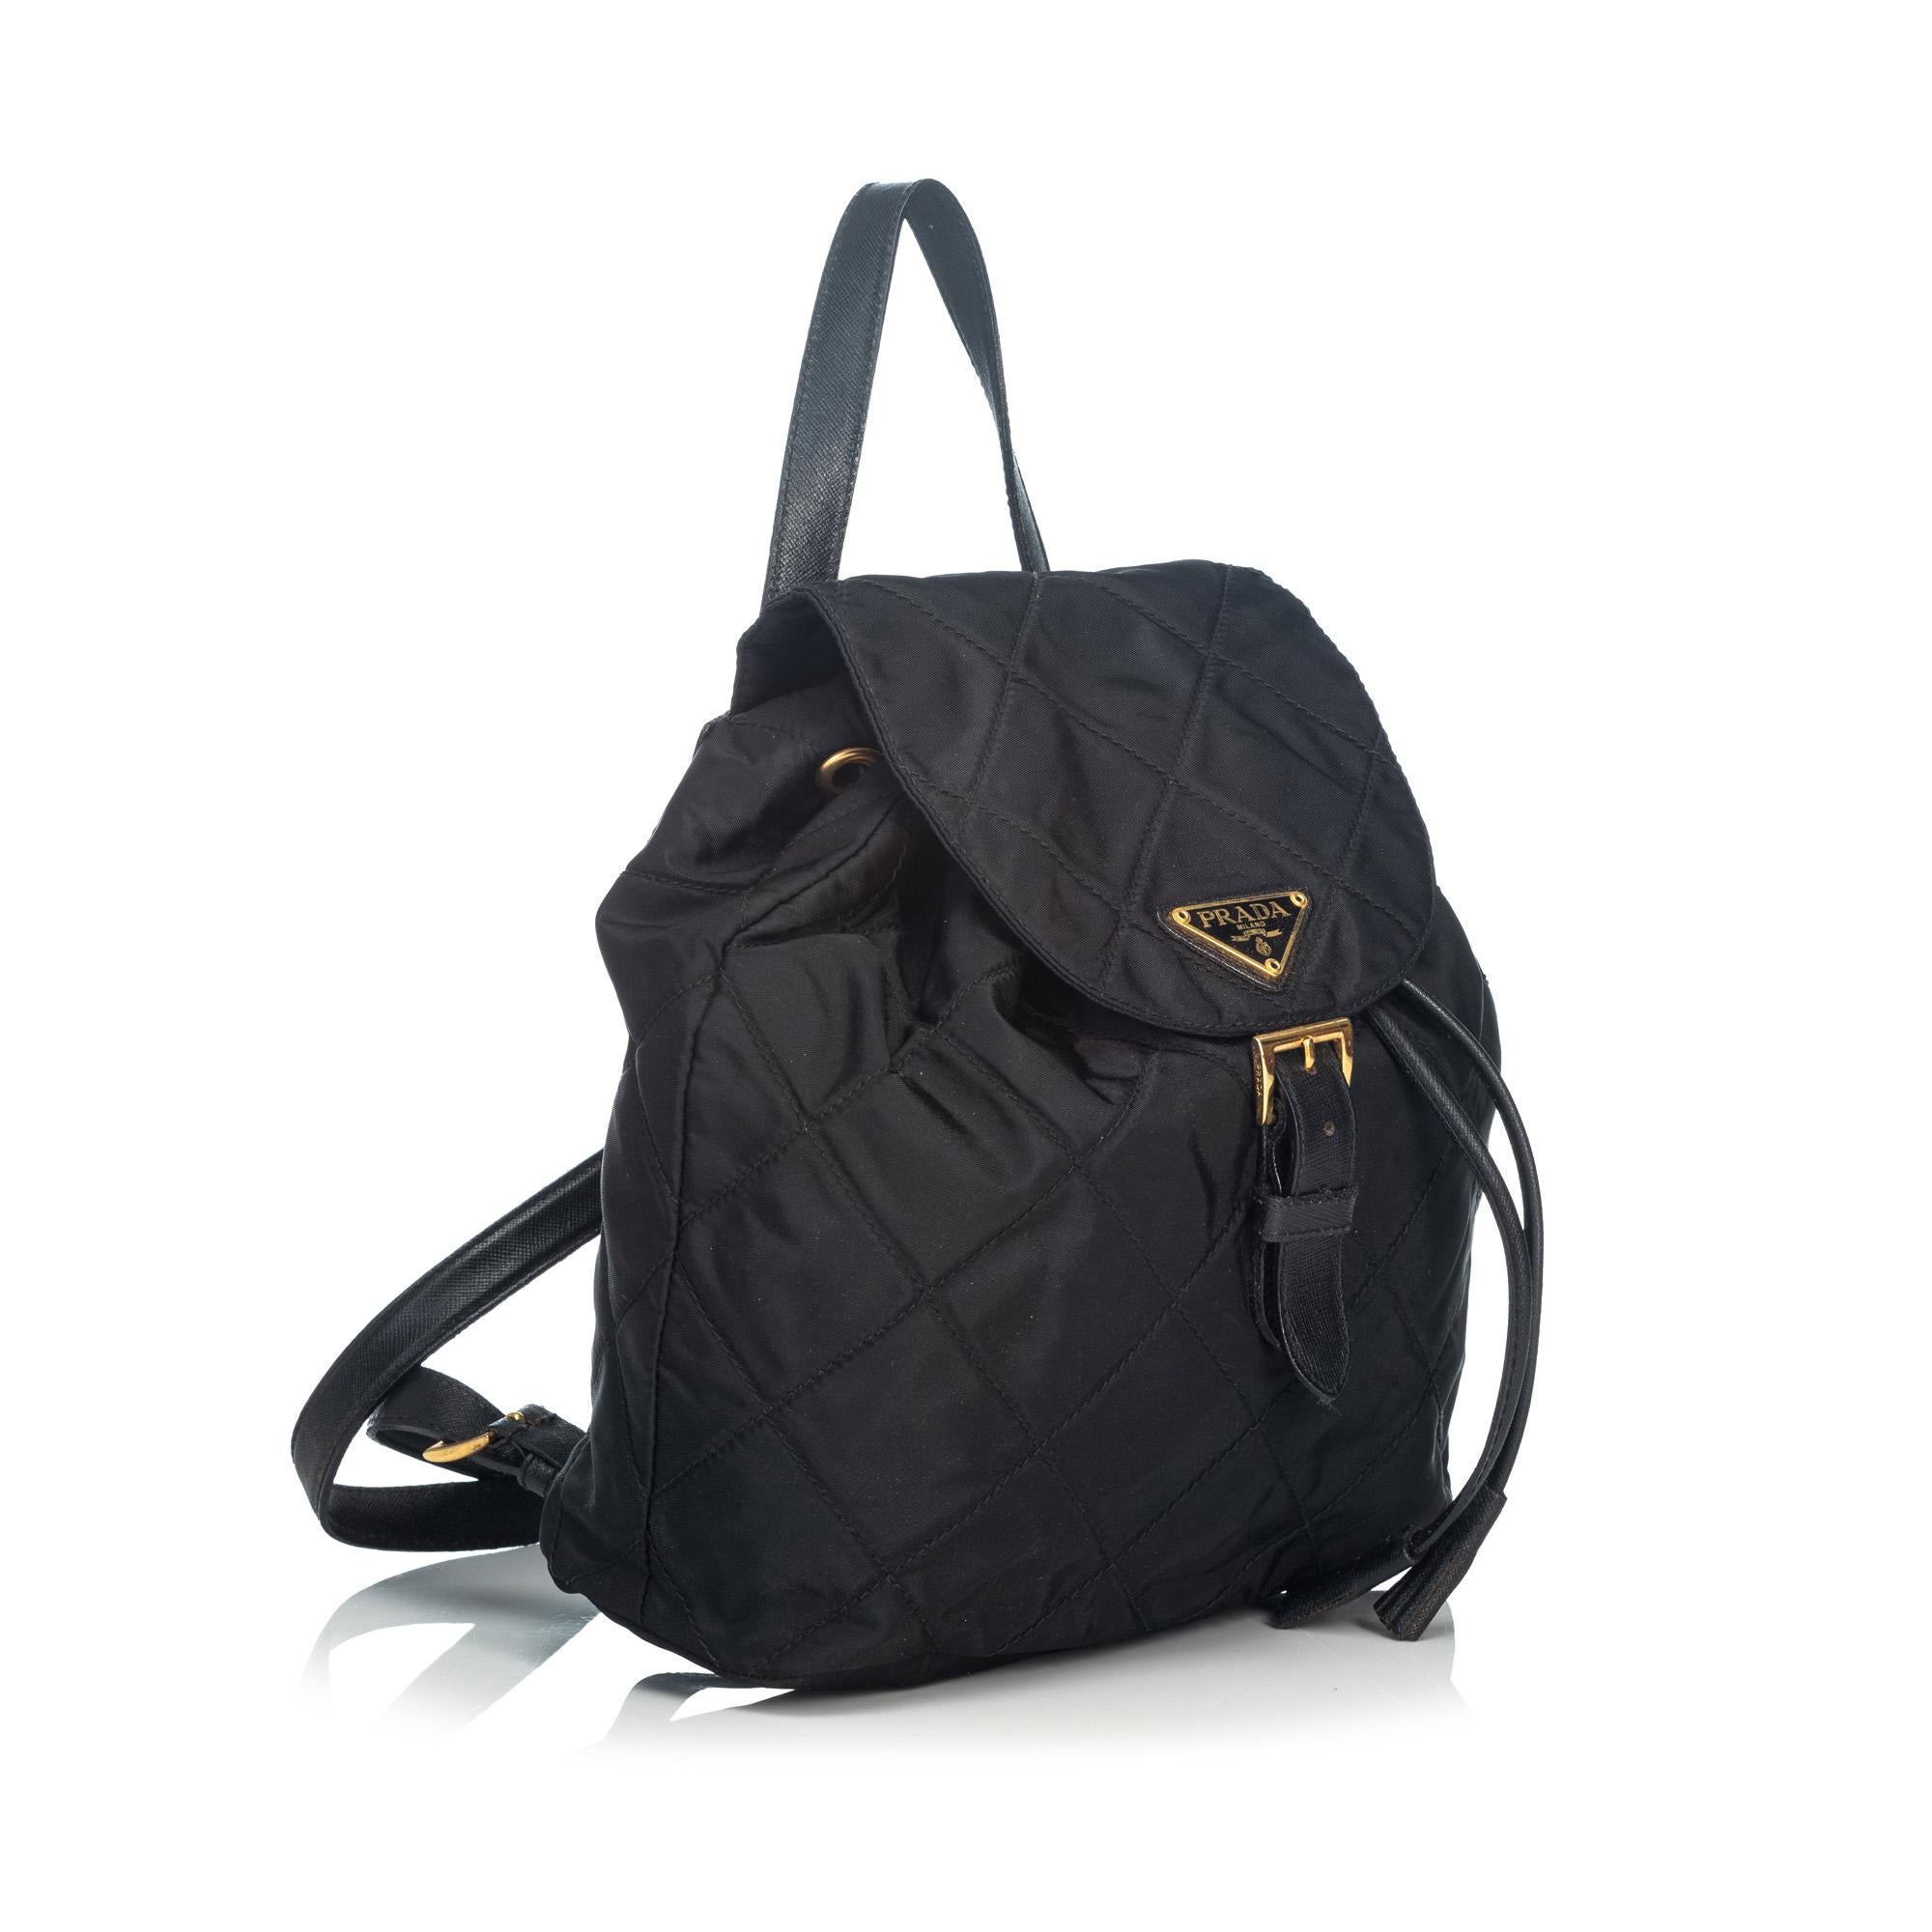 This backpack features a quilted nylon body with leather trim, adjustable flat leather shoulder straps, a front flap with magnetic closure, an open top with drawstring details, and interior zip pocket. It carries as B+ condition rating.

Inclusions: